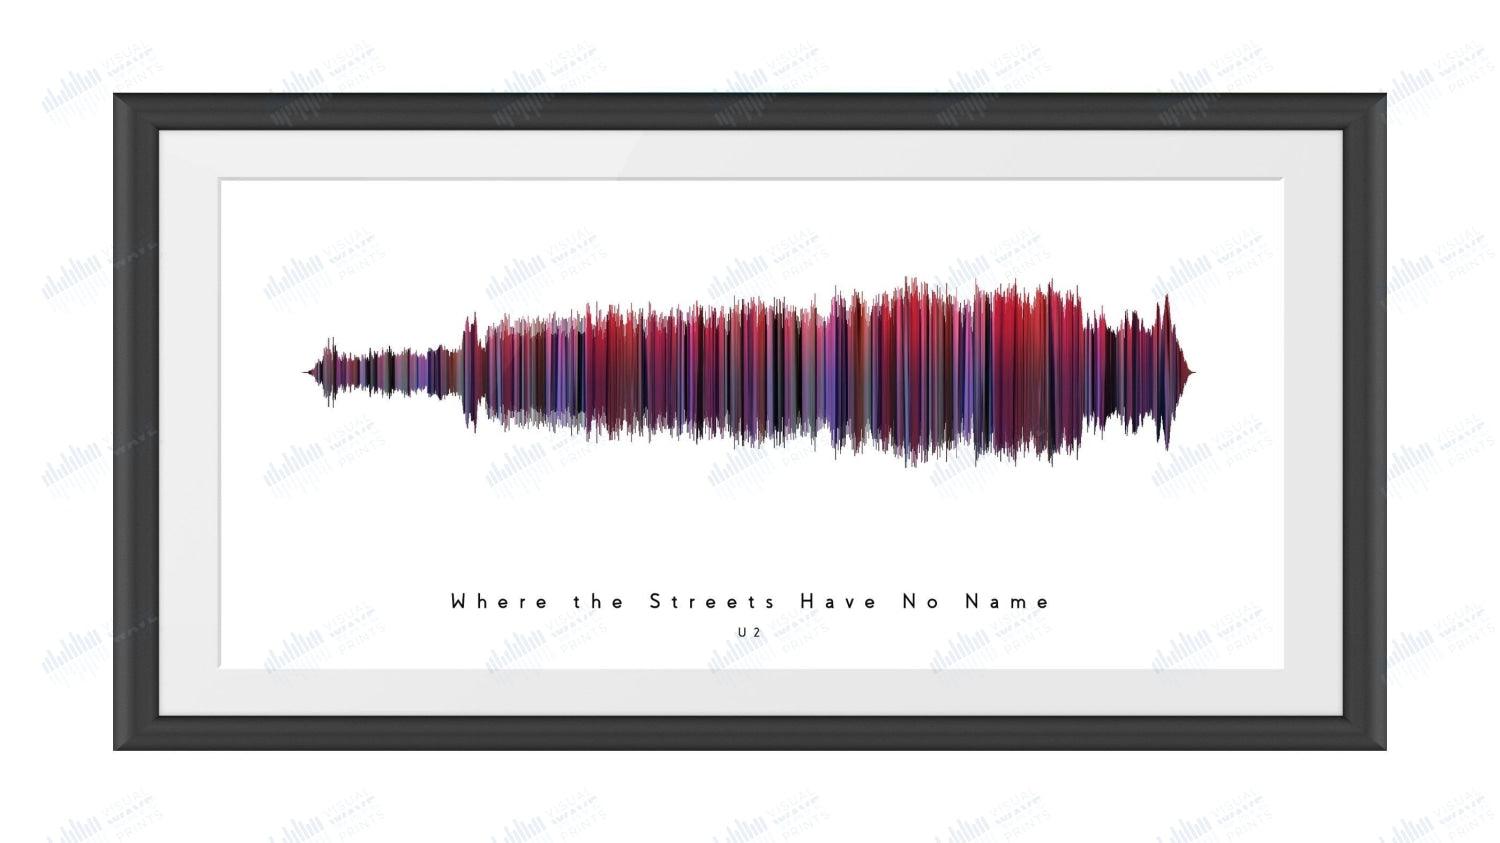 Where the Streets Have No Name by U2 - Visual Wave Prints